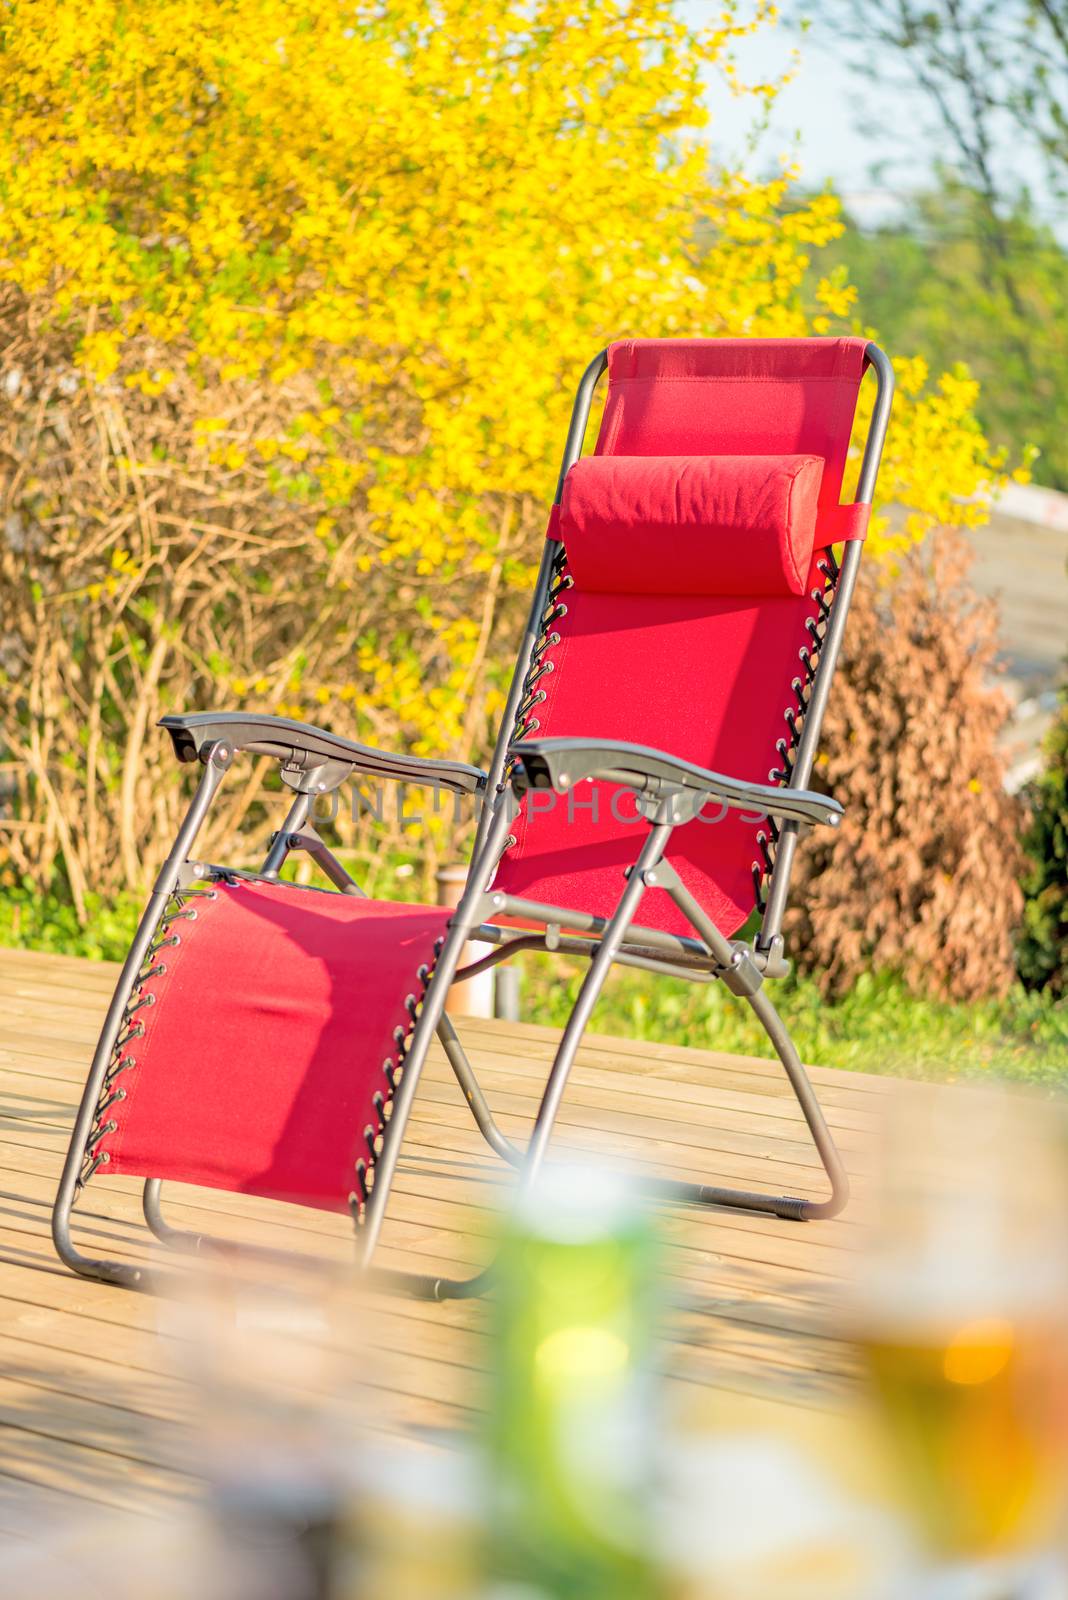 Folding red chair on backyard patio at fall day